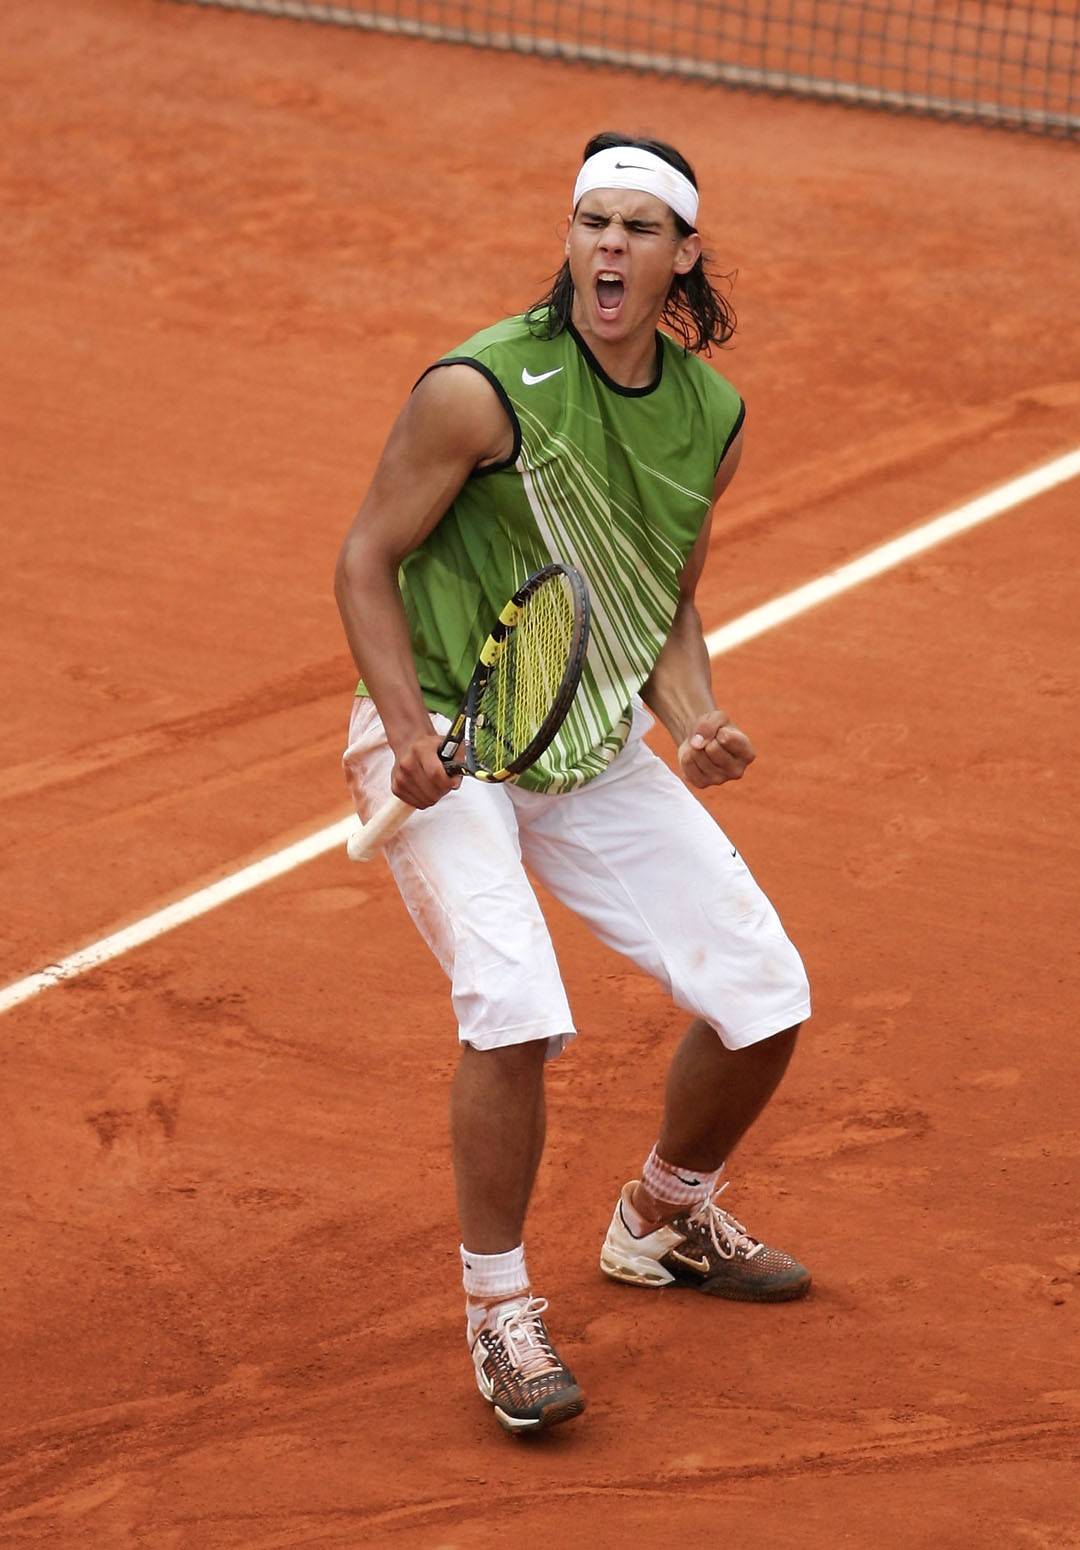 PARIS - JUNE 05:  Rafael Nadal of Spain celebrates a point during his 3-1 set victory over Mariano Puerta of Argentina during the Mens Final match during the fourteenth day of the French Open at Roland Garros on June 5, 2005 in Paris, France.  (Photo by M (Foto: Getty Images)